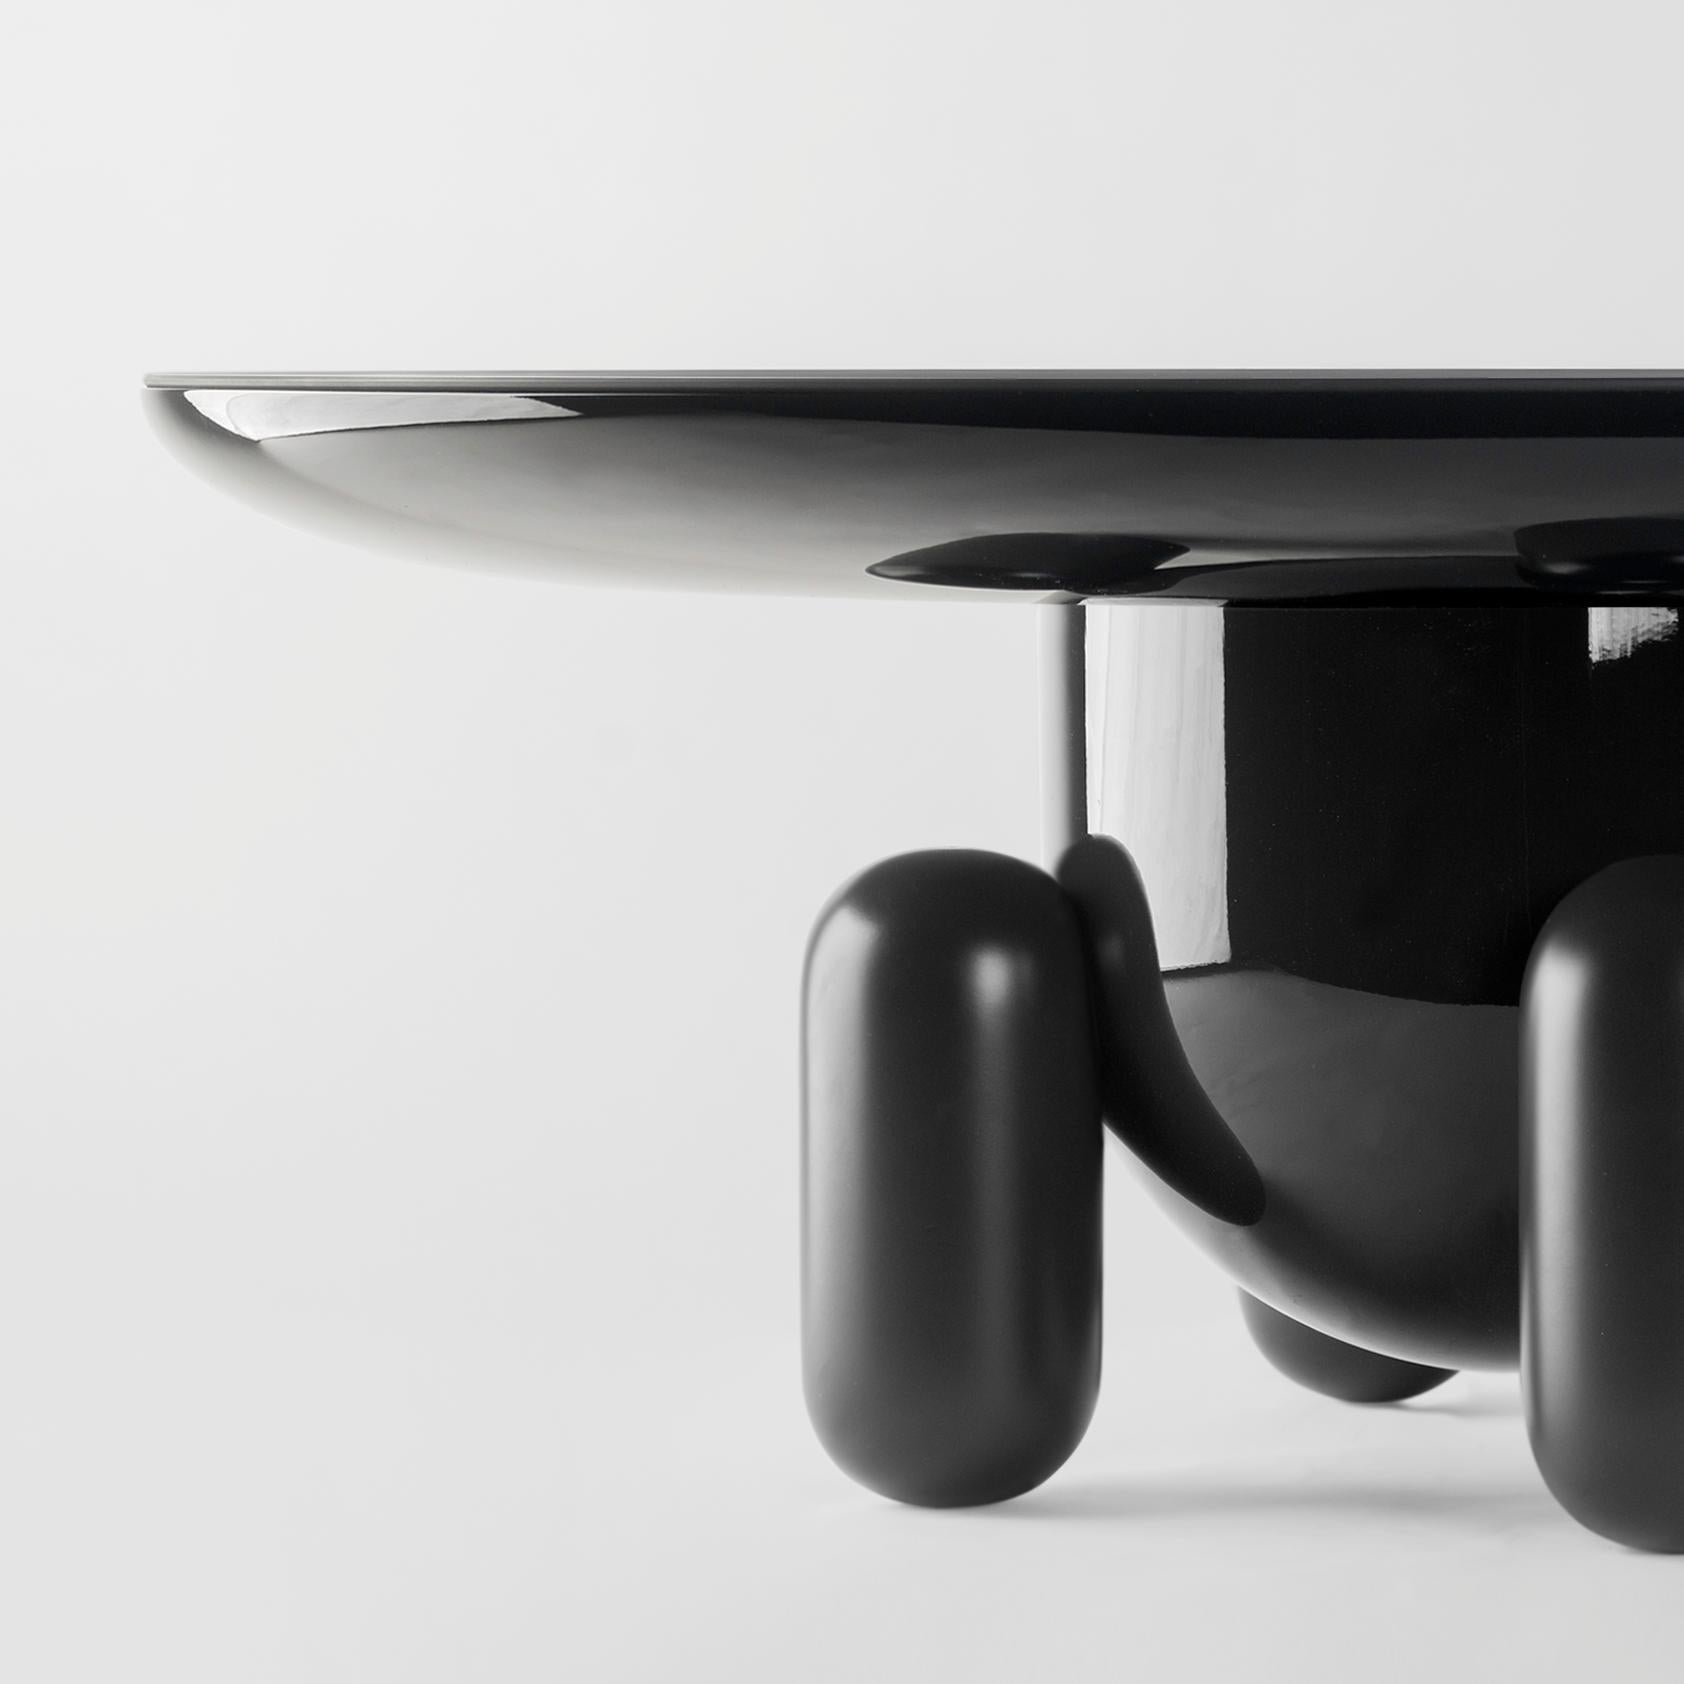 Dark grey explorer #03 table

Design by Jaime Hayon, 2019
Manufactured by BD Barcelona.

Laquered fibreglass body. Solid turned wooden legs and lacquered. Painted glass tabletop.

Measures: 100 Ø x 42 cm

- Glass: Ral 7021
- Body: Ral 7021